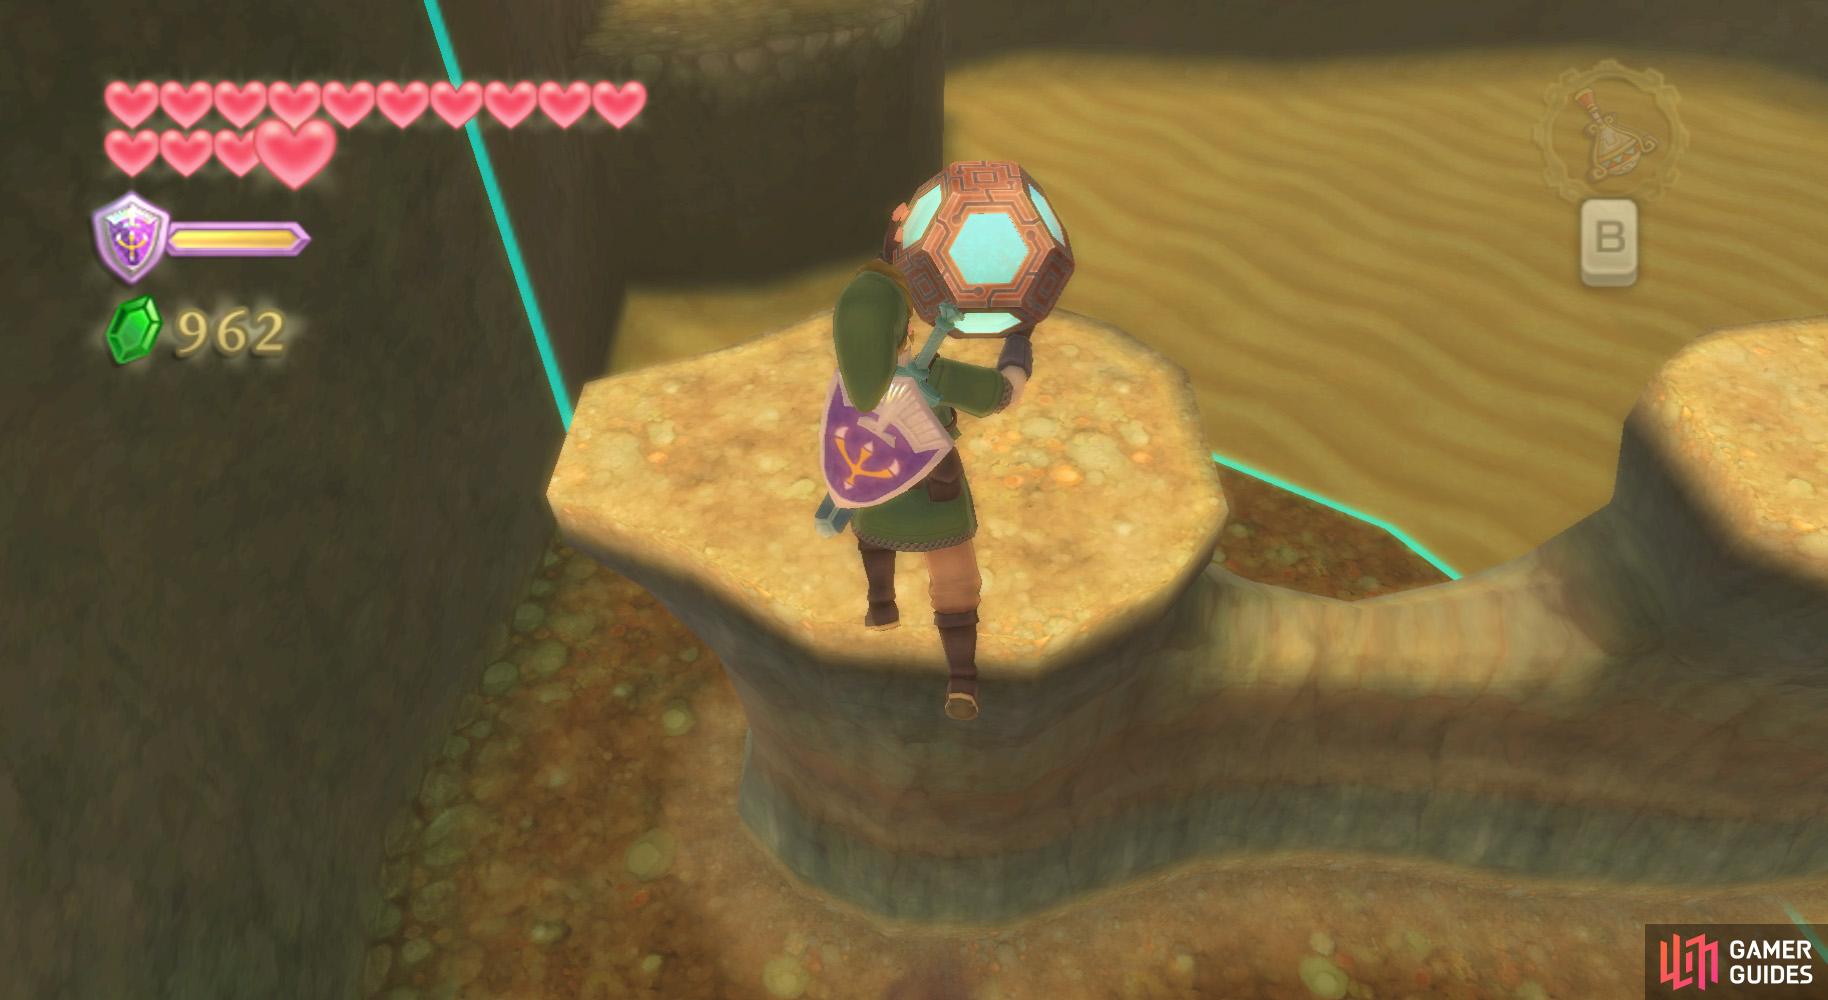 Even while carrying he orb, Link is agile enough to jump across gaps.